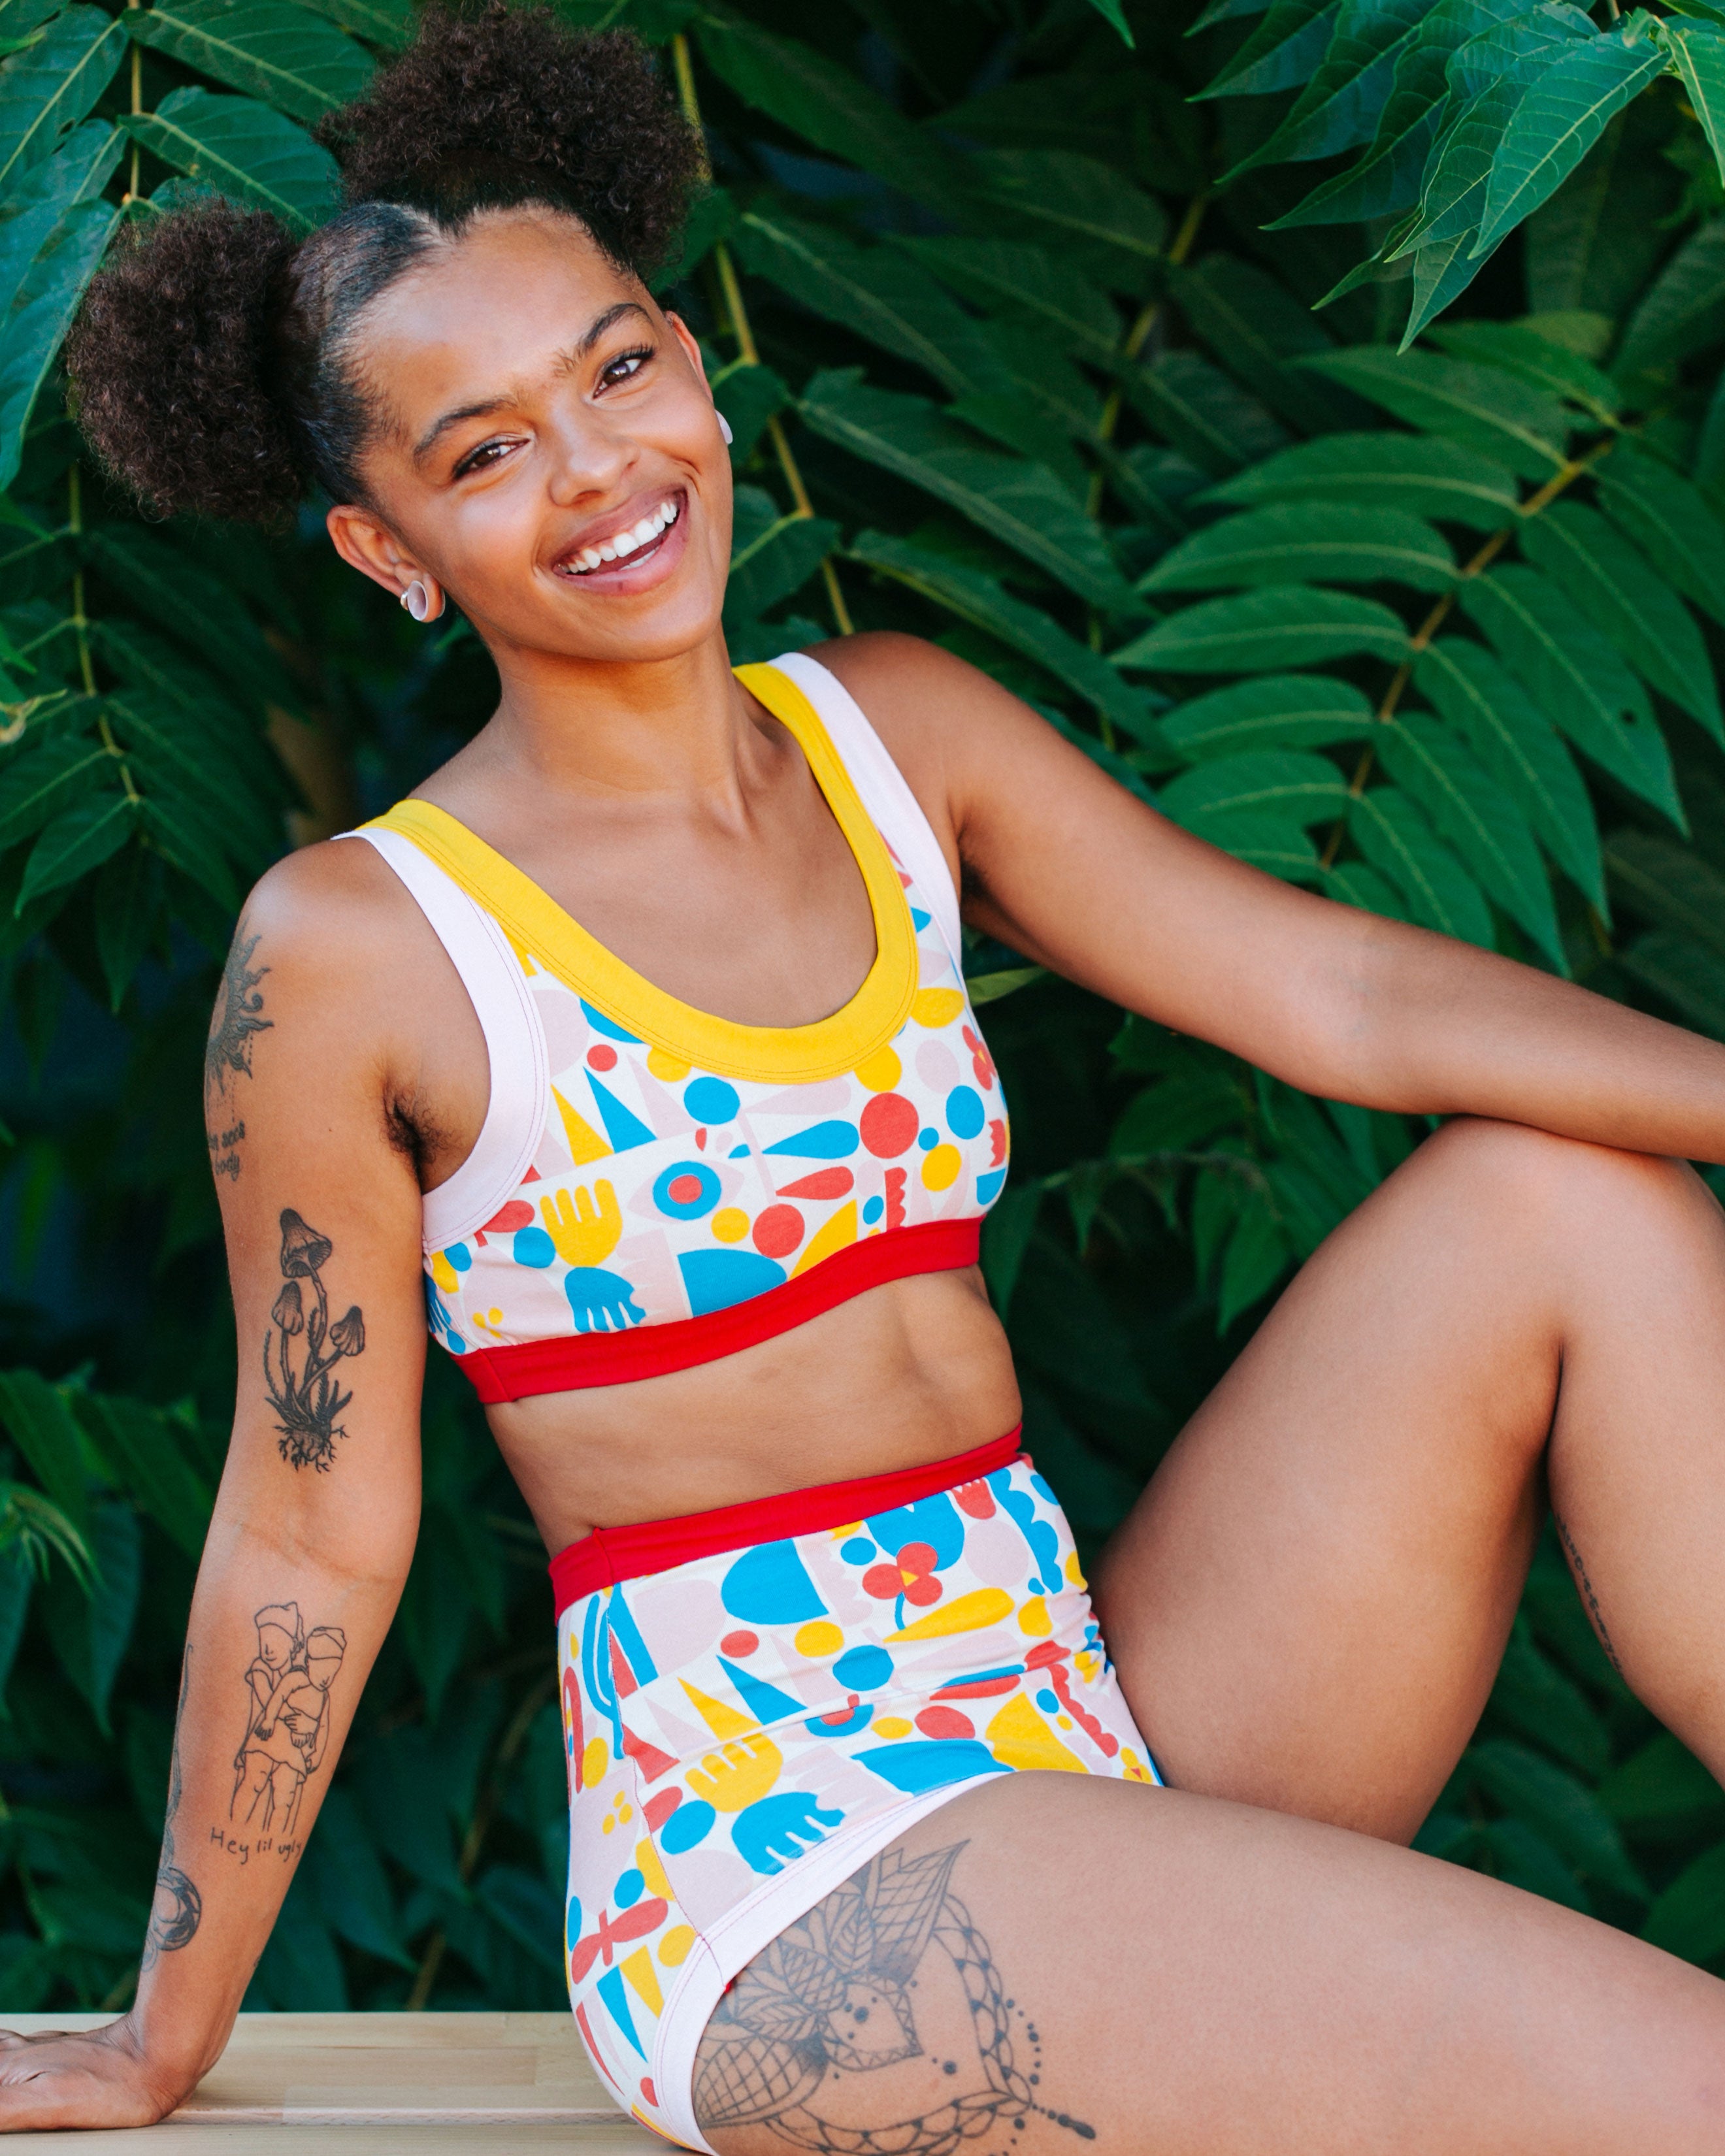 Model smiling and sitting in front of tropical plants wearing Bralette and Sky Rise style underwear in Balance by Lisa Congdon: geometric shapes in red, yellow, pink, and blue colors.